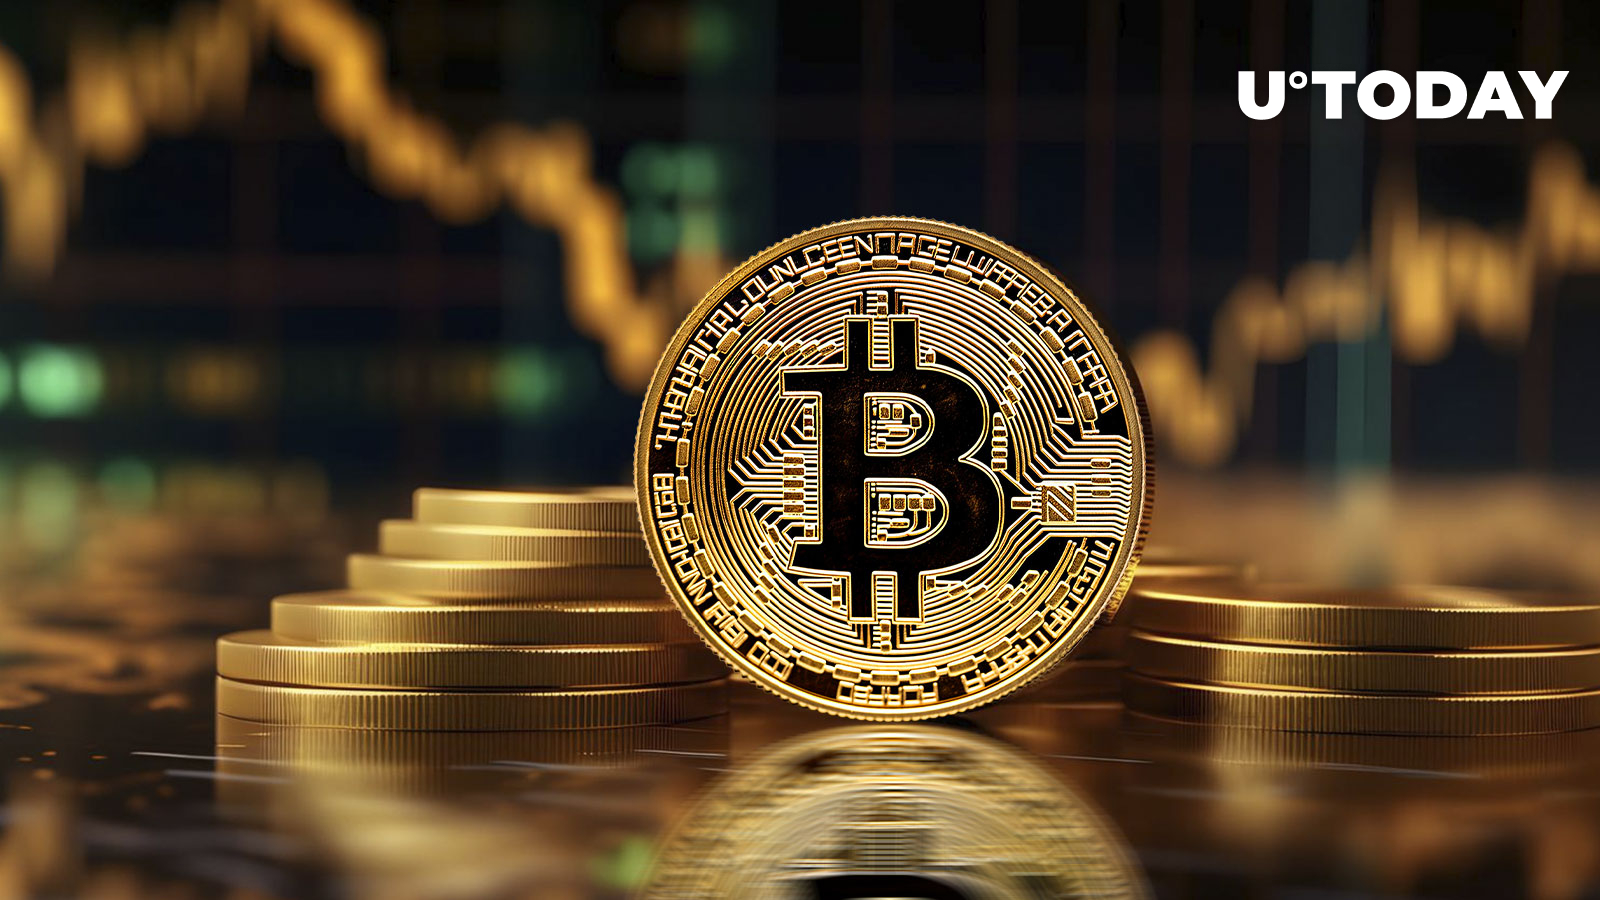 Bitcoin (BTC) Reclaims $60,000 as Crucial Metric Points to Price Rebound - U.Today